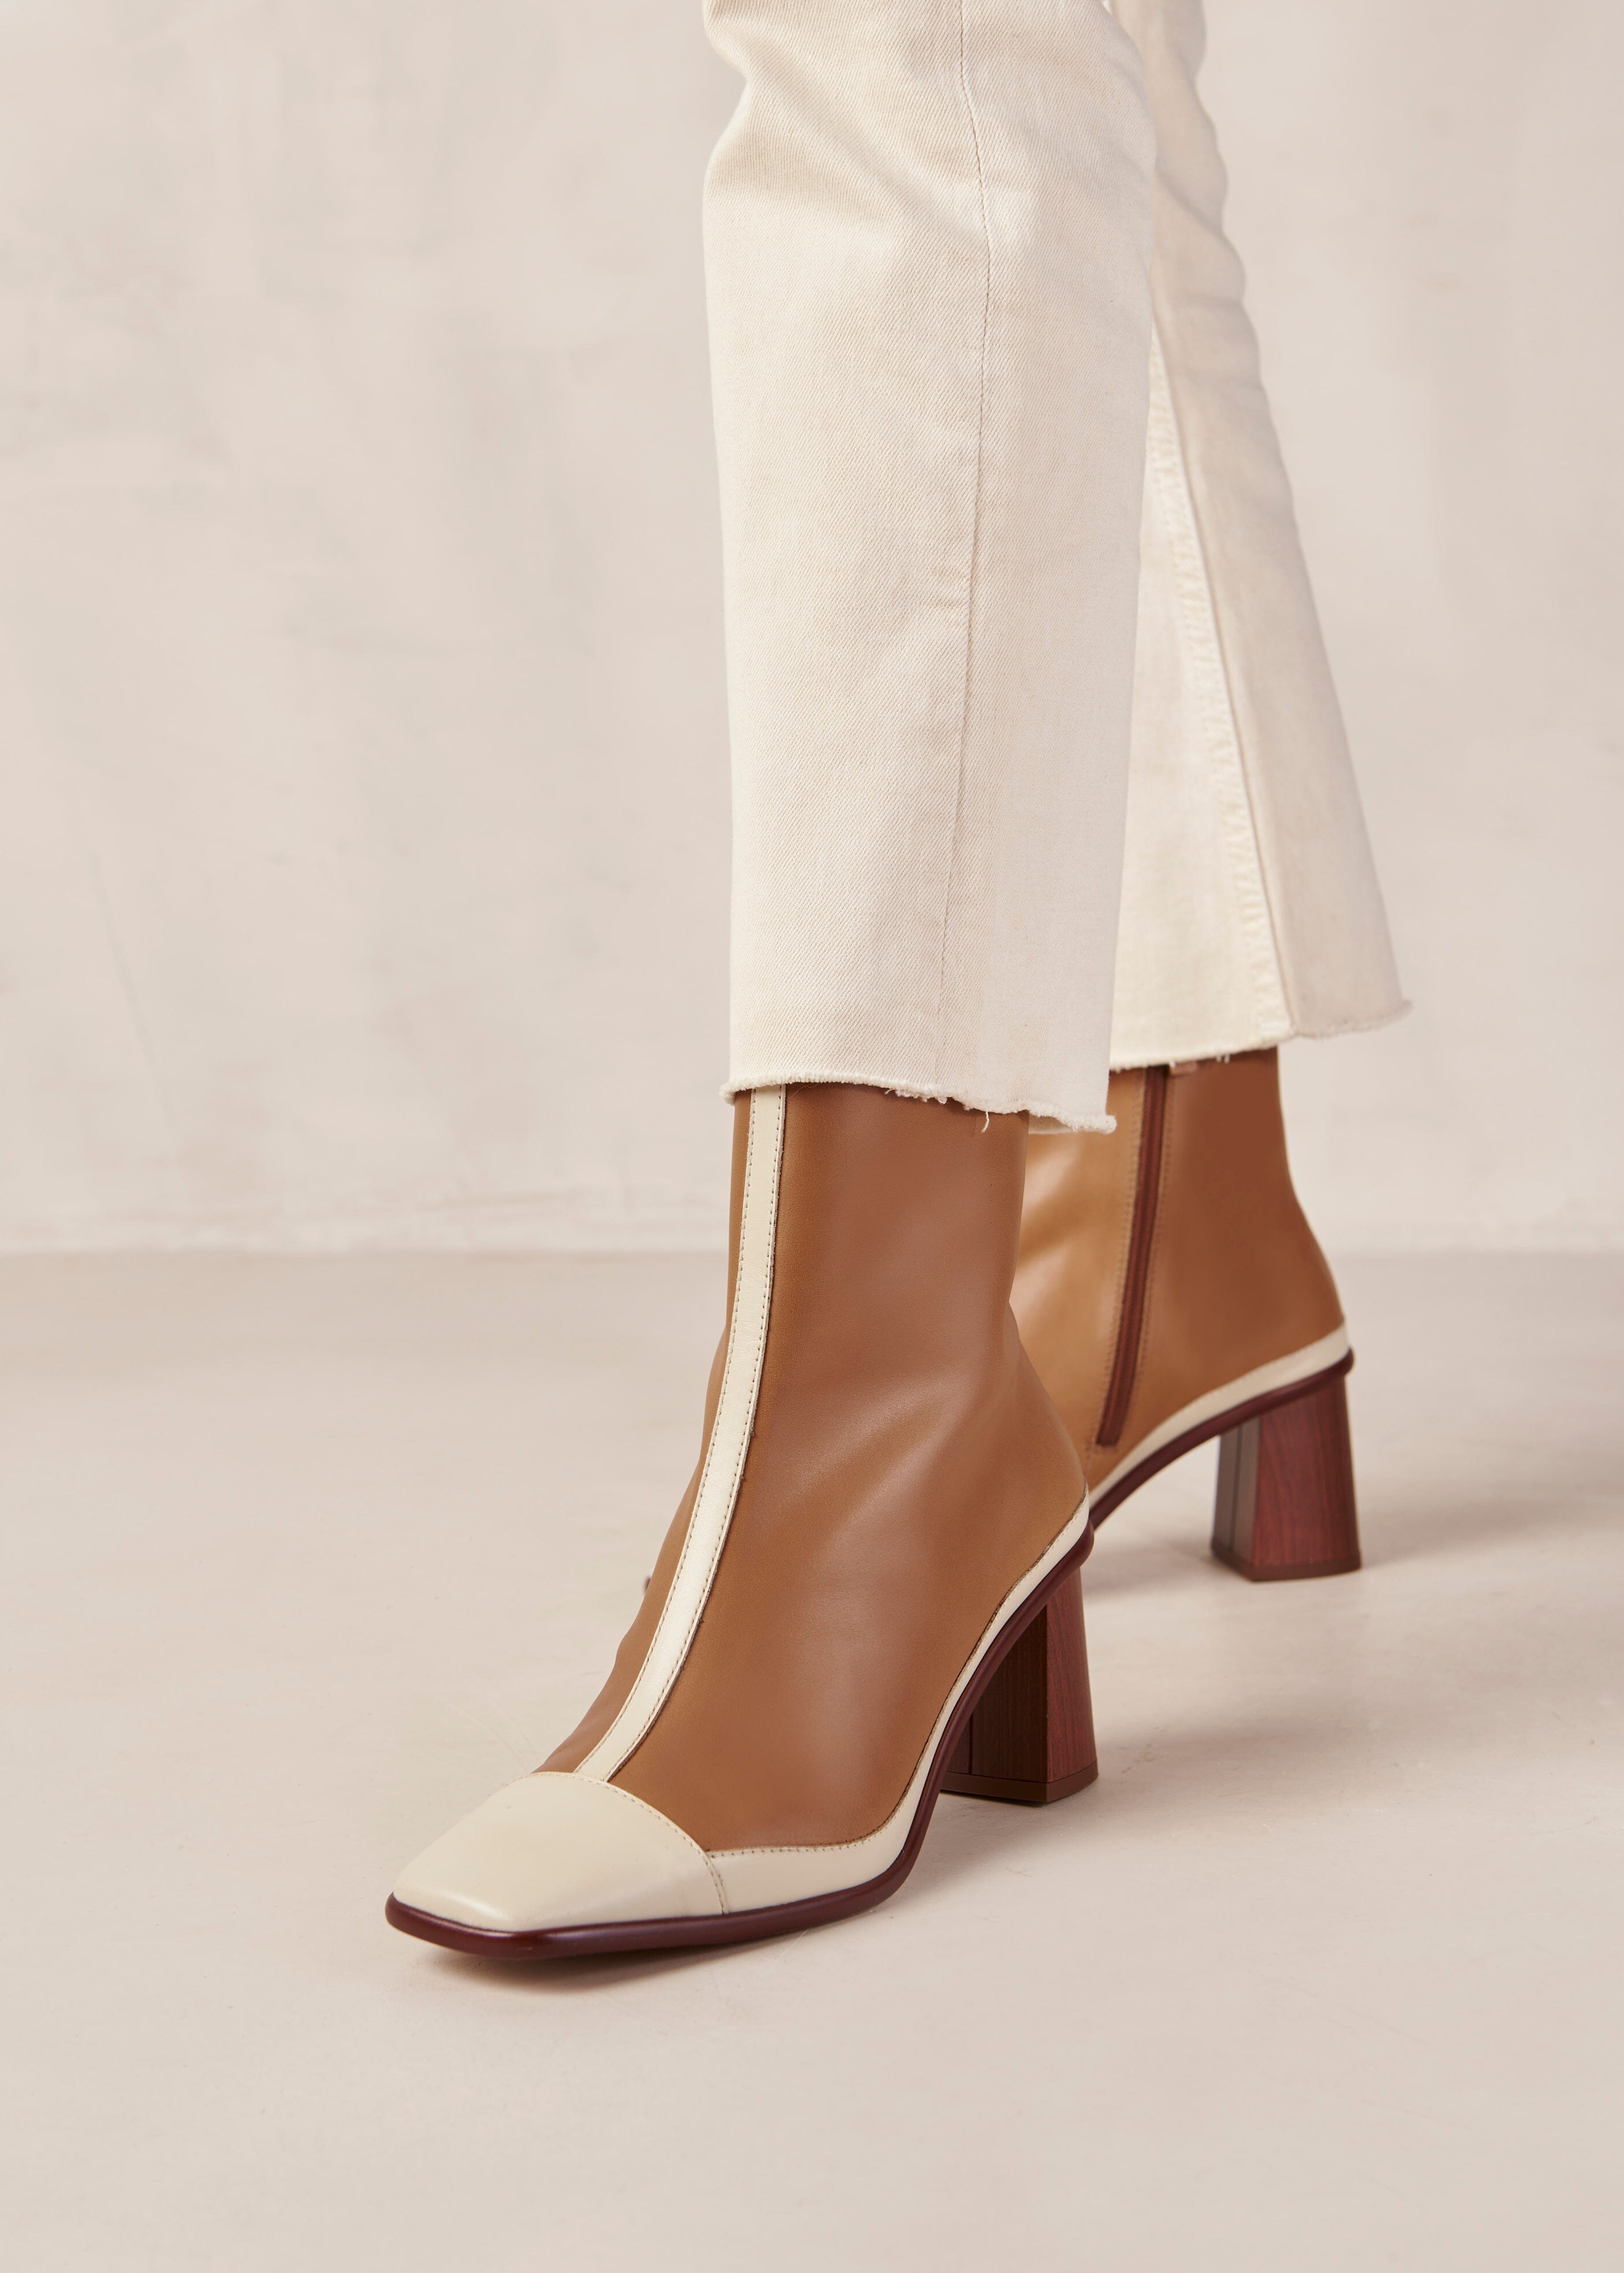 West Retro - Brown and White Leather Boots | ALOHAS